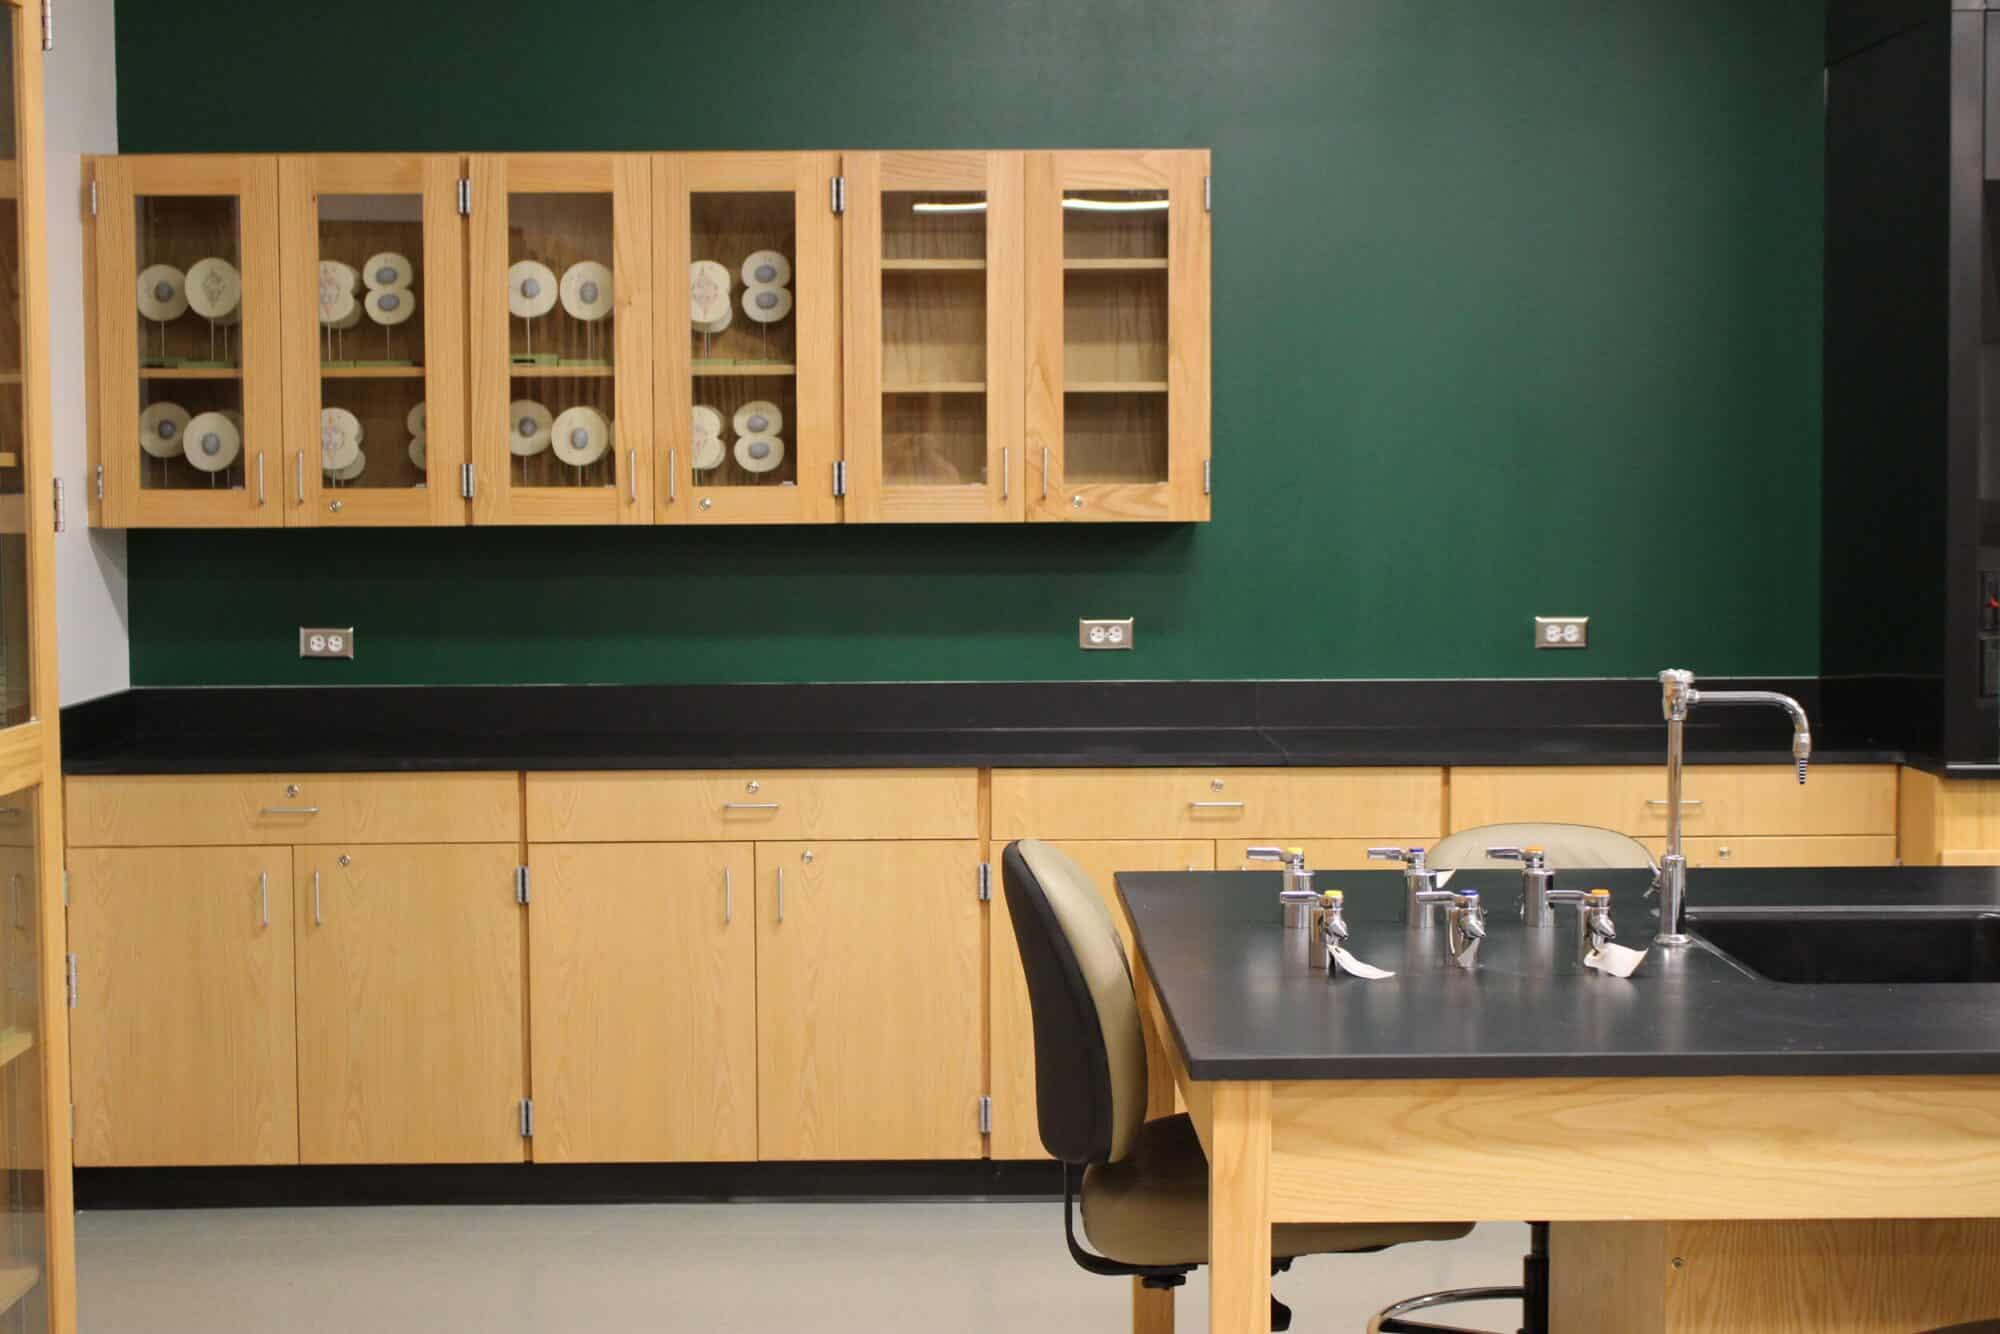 Modern laboratory interior with wooden cabinets and sink.